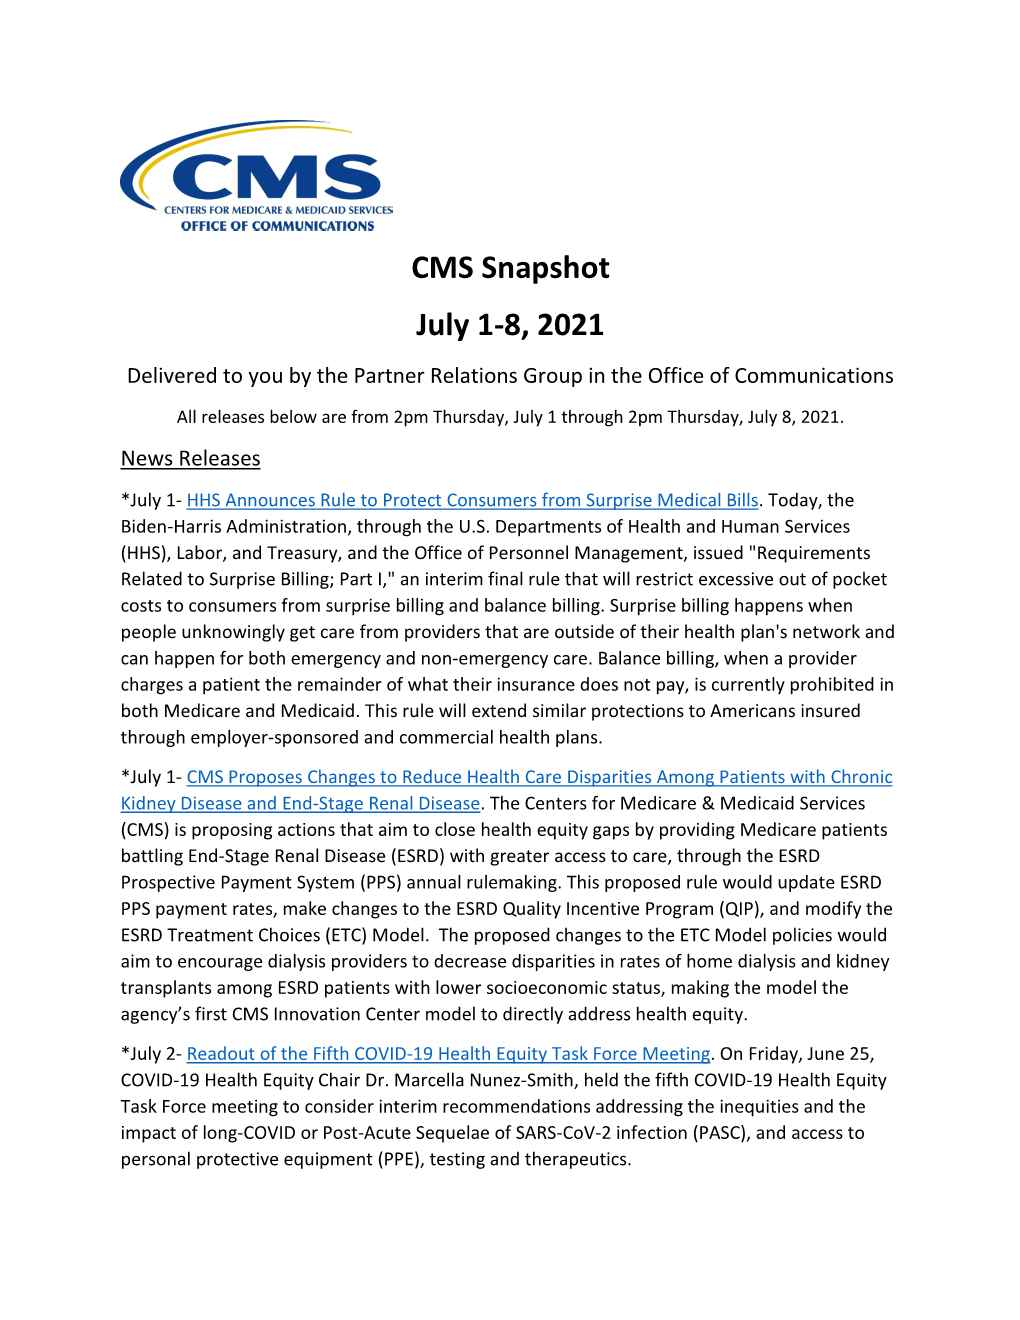 CMS Snapshot July 1-8, 2021 Delivered to You by the Partner Relations Group in the Office of Communications